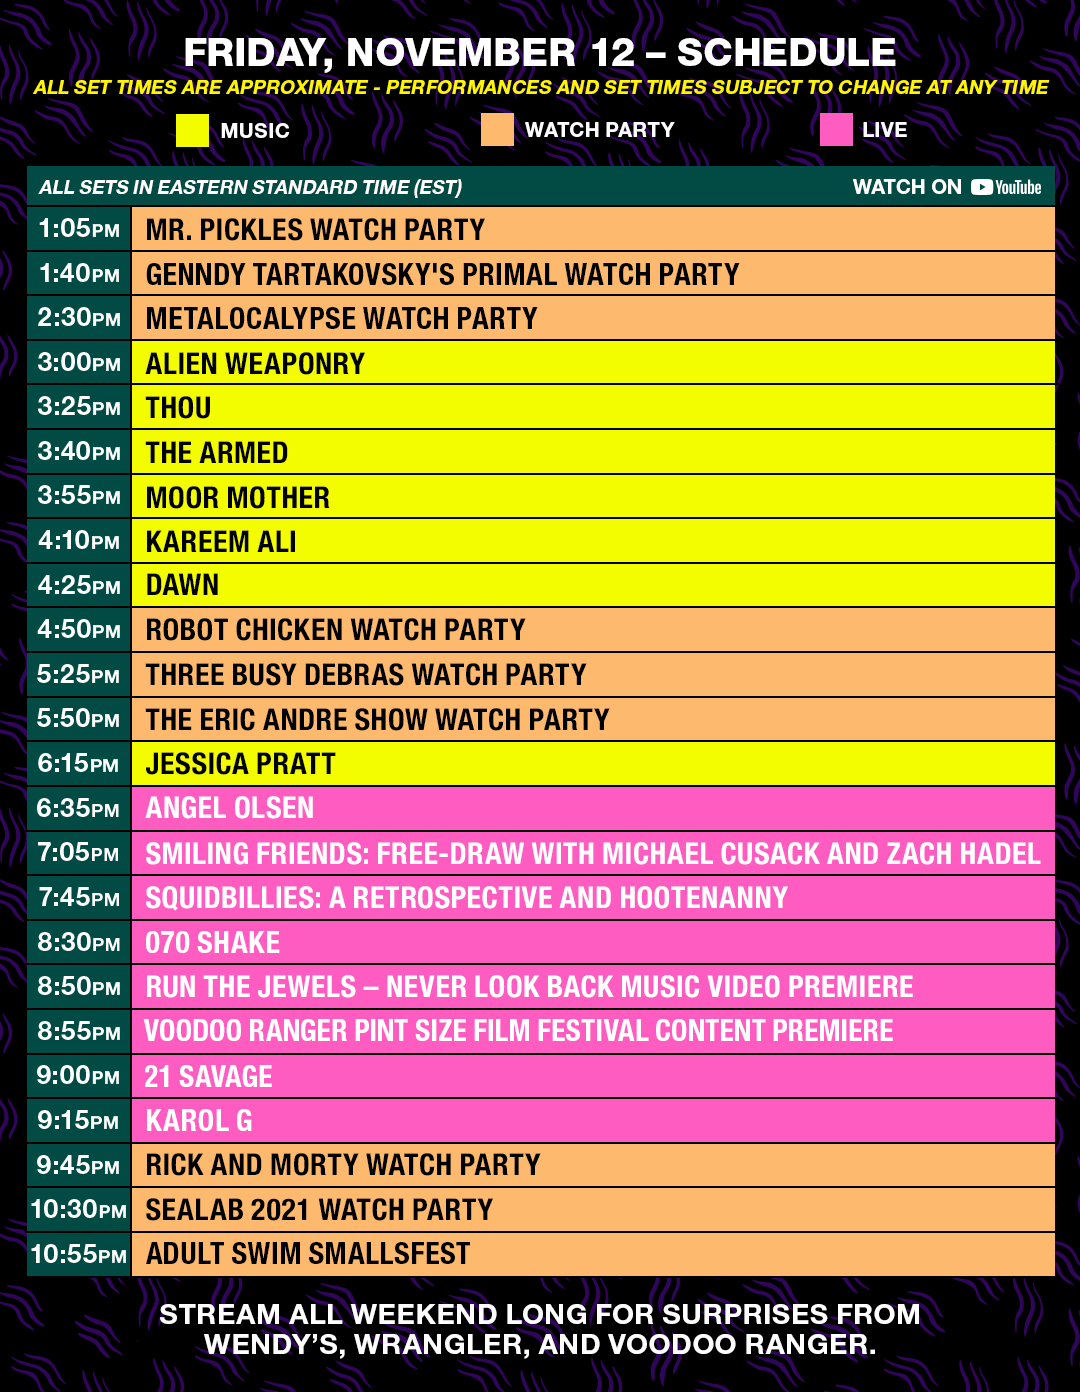 Adult Swim Festival livestream schedule has been posted r/adultswim